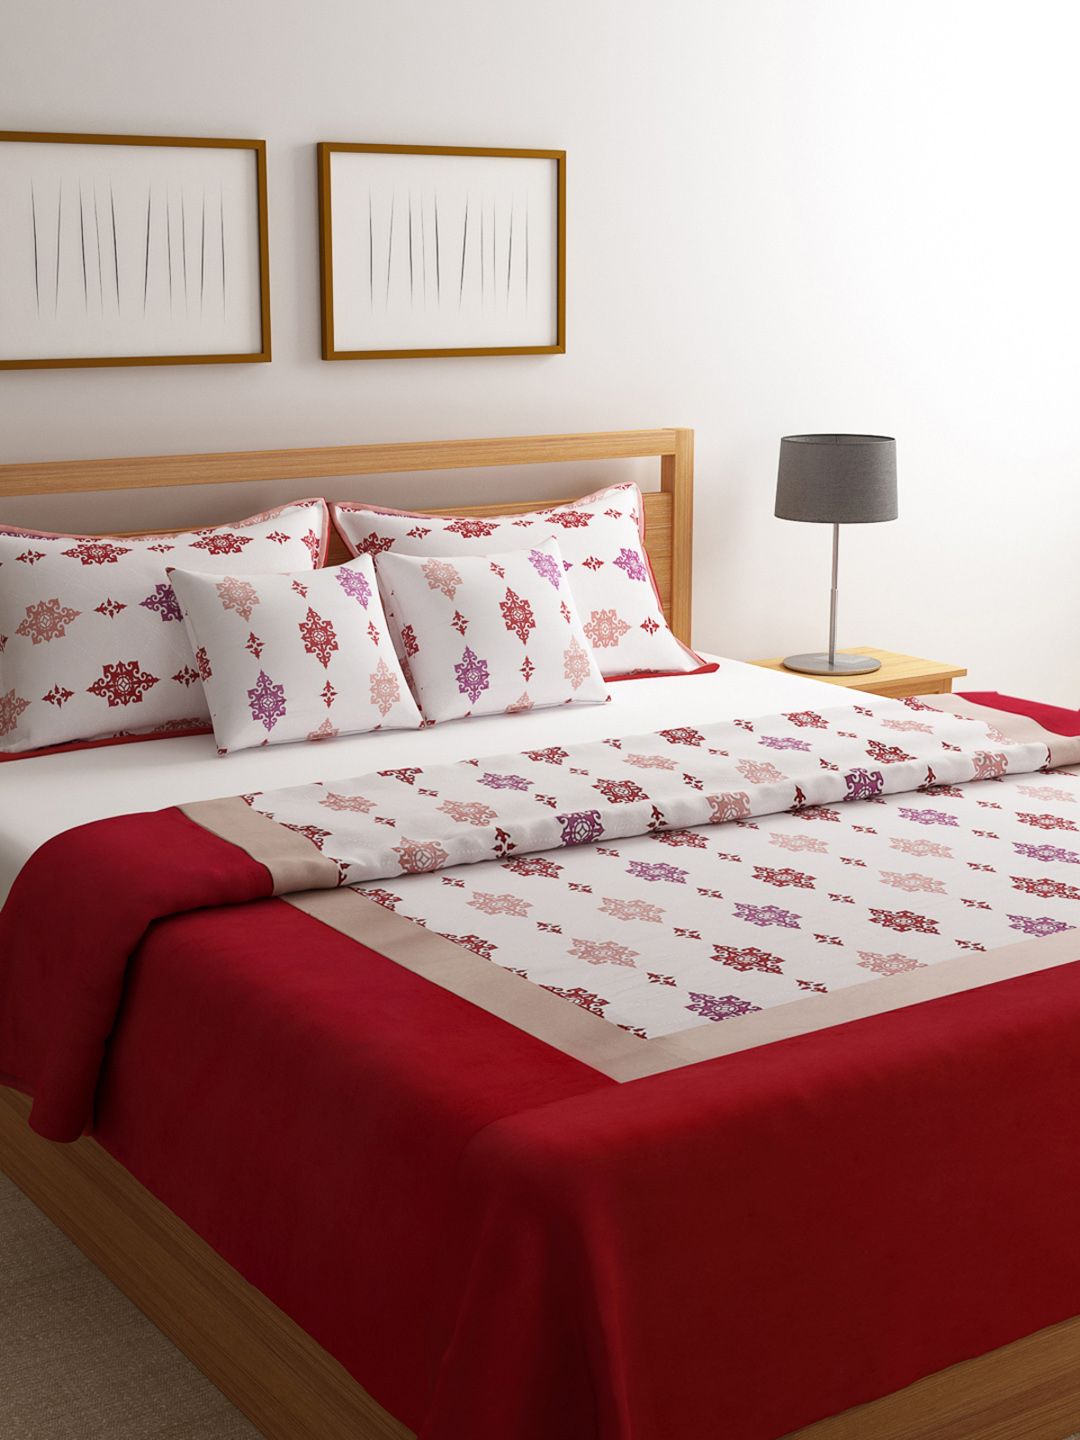 ROMEE White & Maroon Ethnic Motifs Printed Bed Cover With 2 Pillow Covers & 2 Cushion Covers Price in India